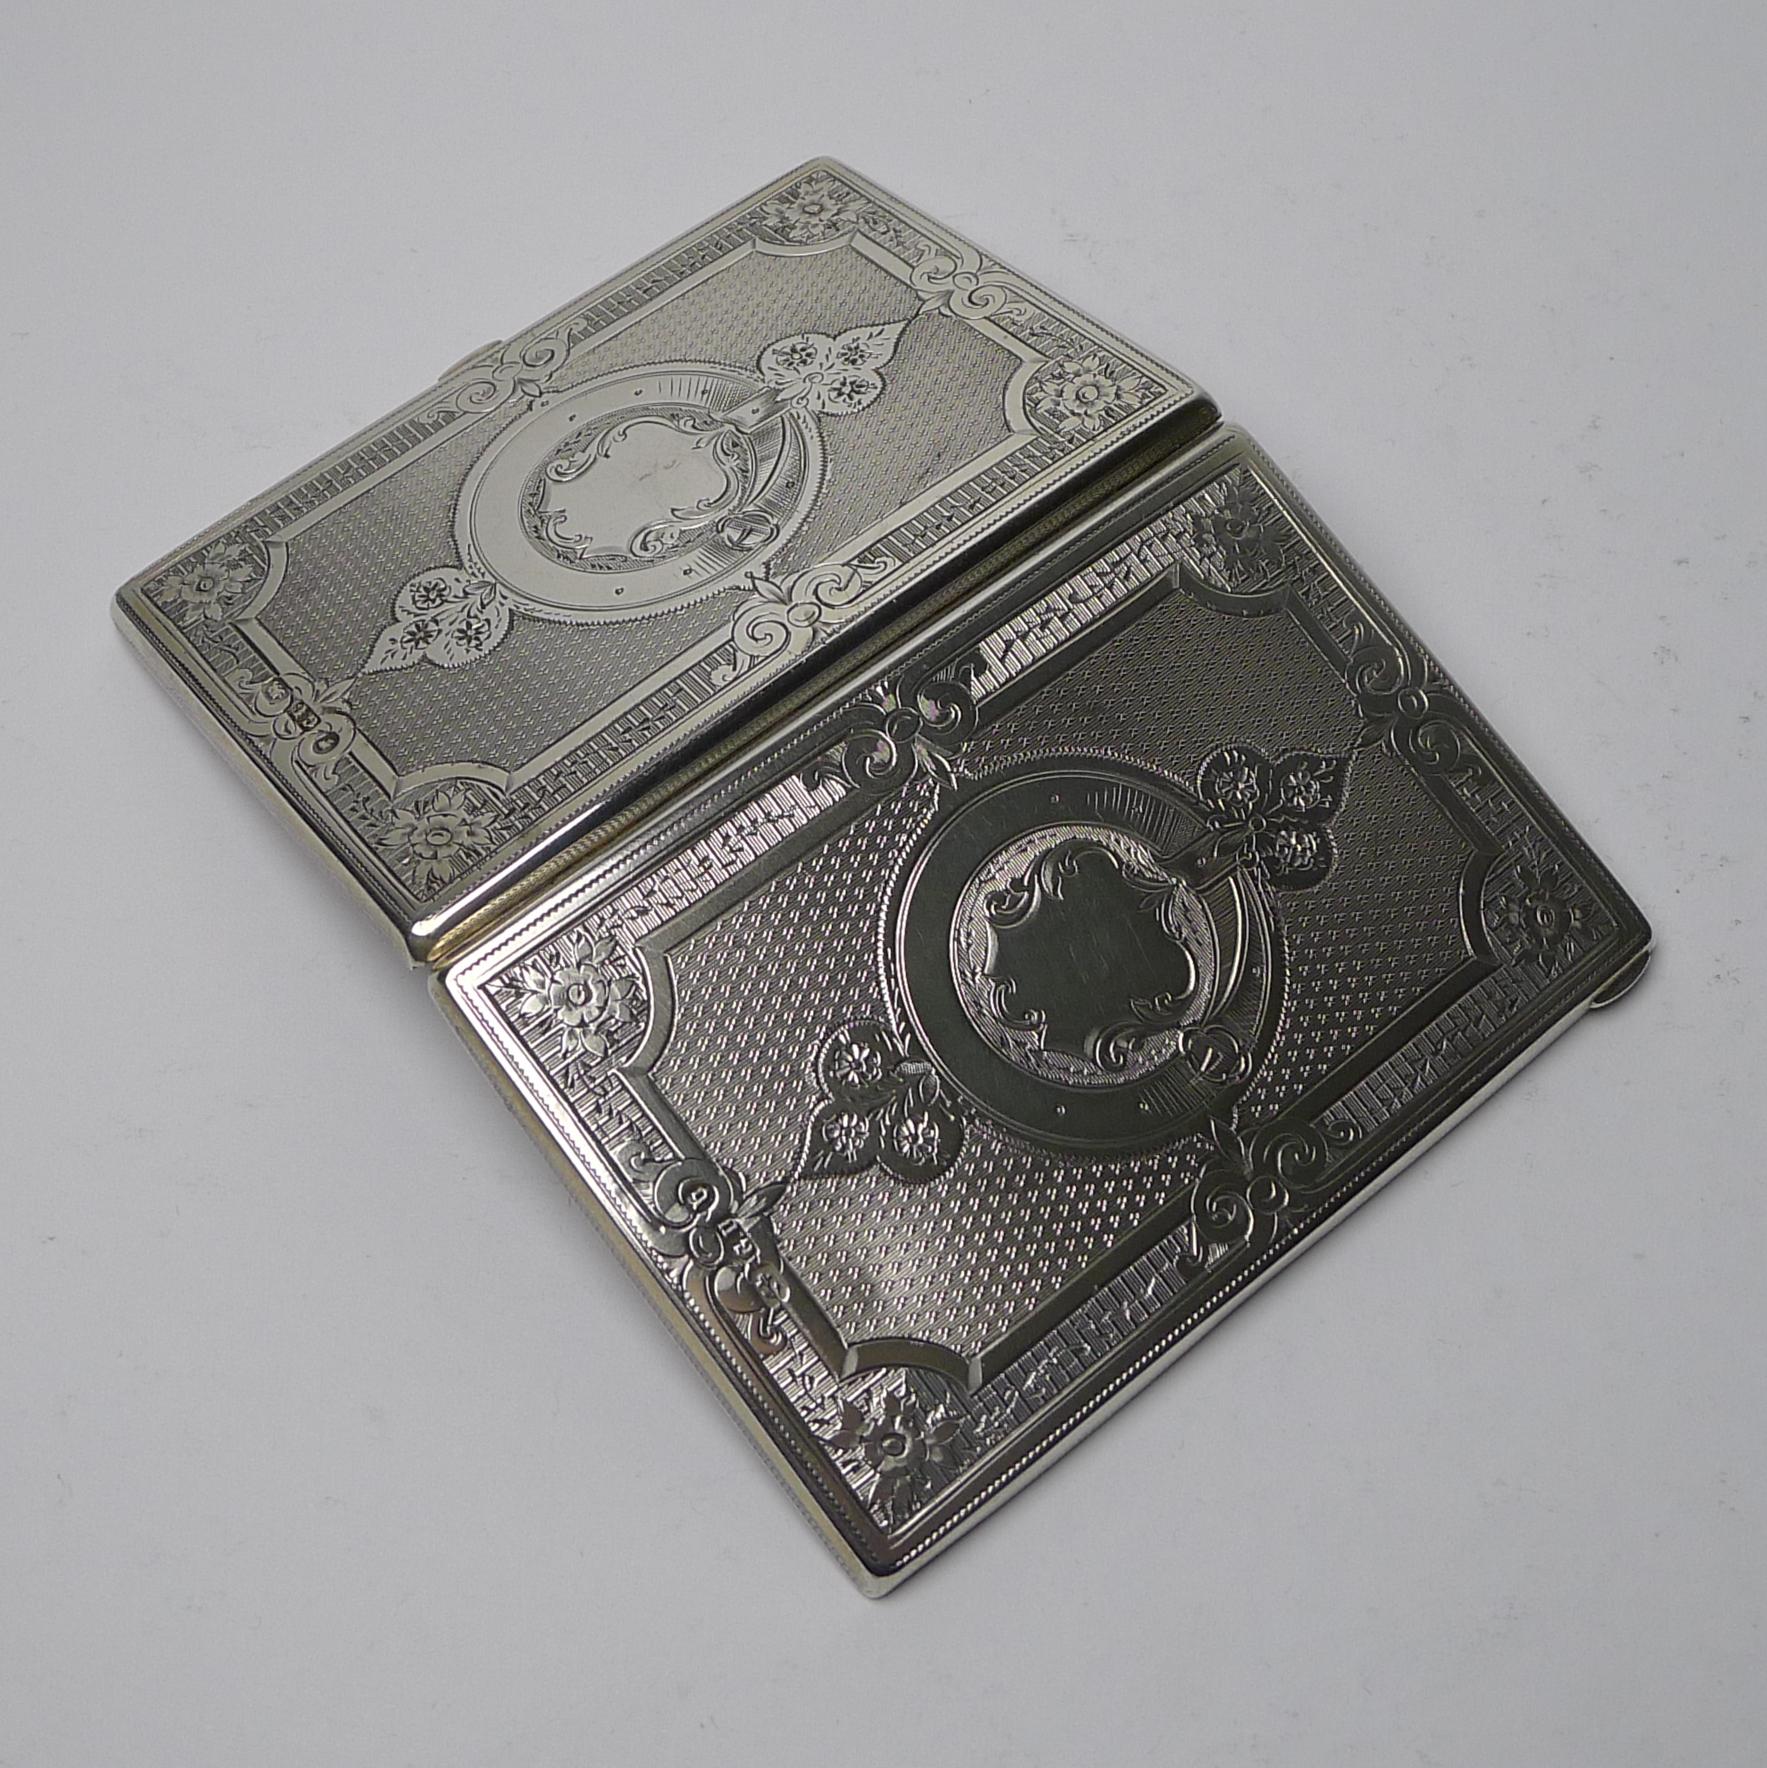 A stunning Victorian card case made by the highly collectable silversmith, George Unite. The silver is fully hallmarked for Birmingham 1876 together with the maker's initials, G U and the highly sought-after Queen Victoria's head duty mark.

The